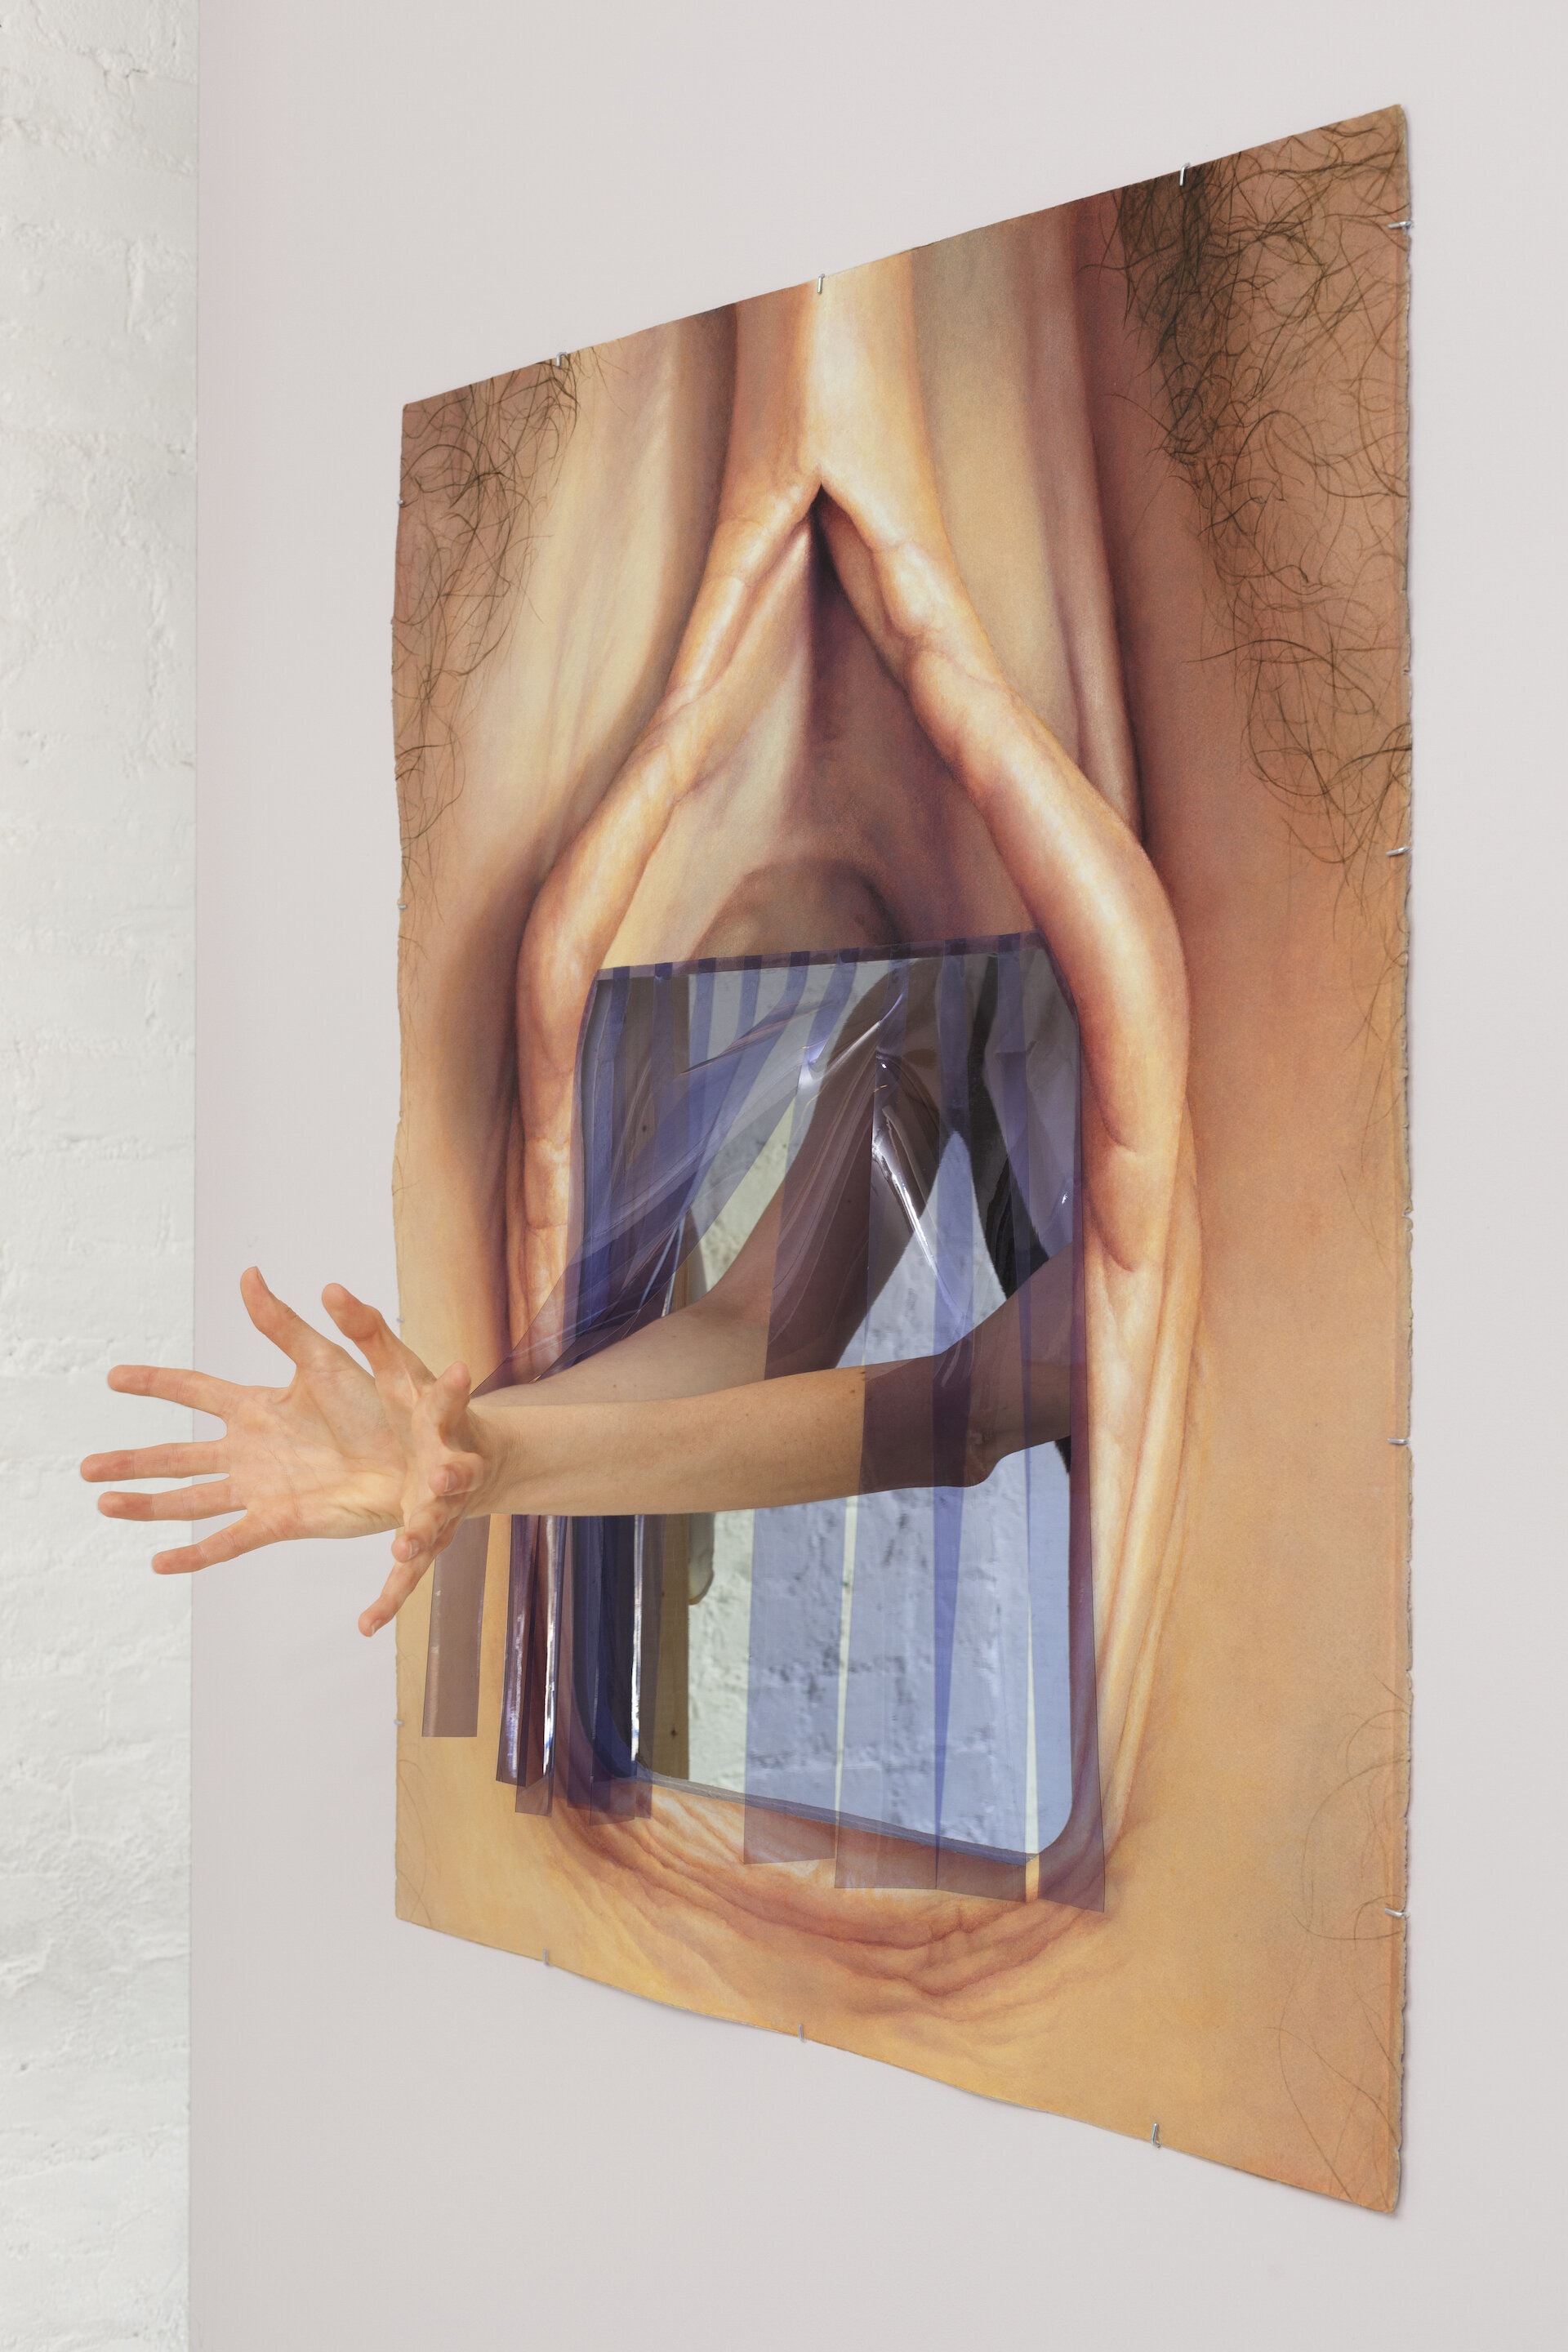   {strip door, vagina} , watercolor and plastic on paper,  29 1/2" x 34 5/8", activated by arms in performance  